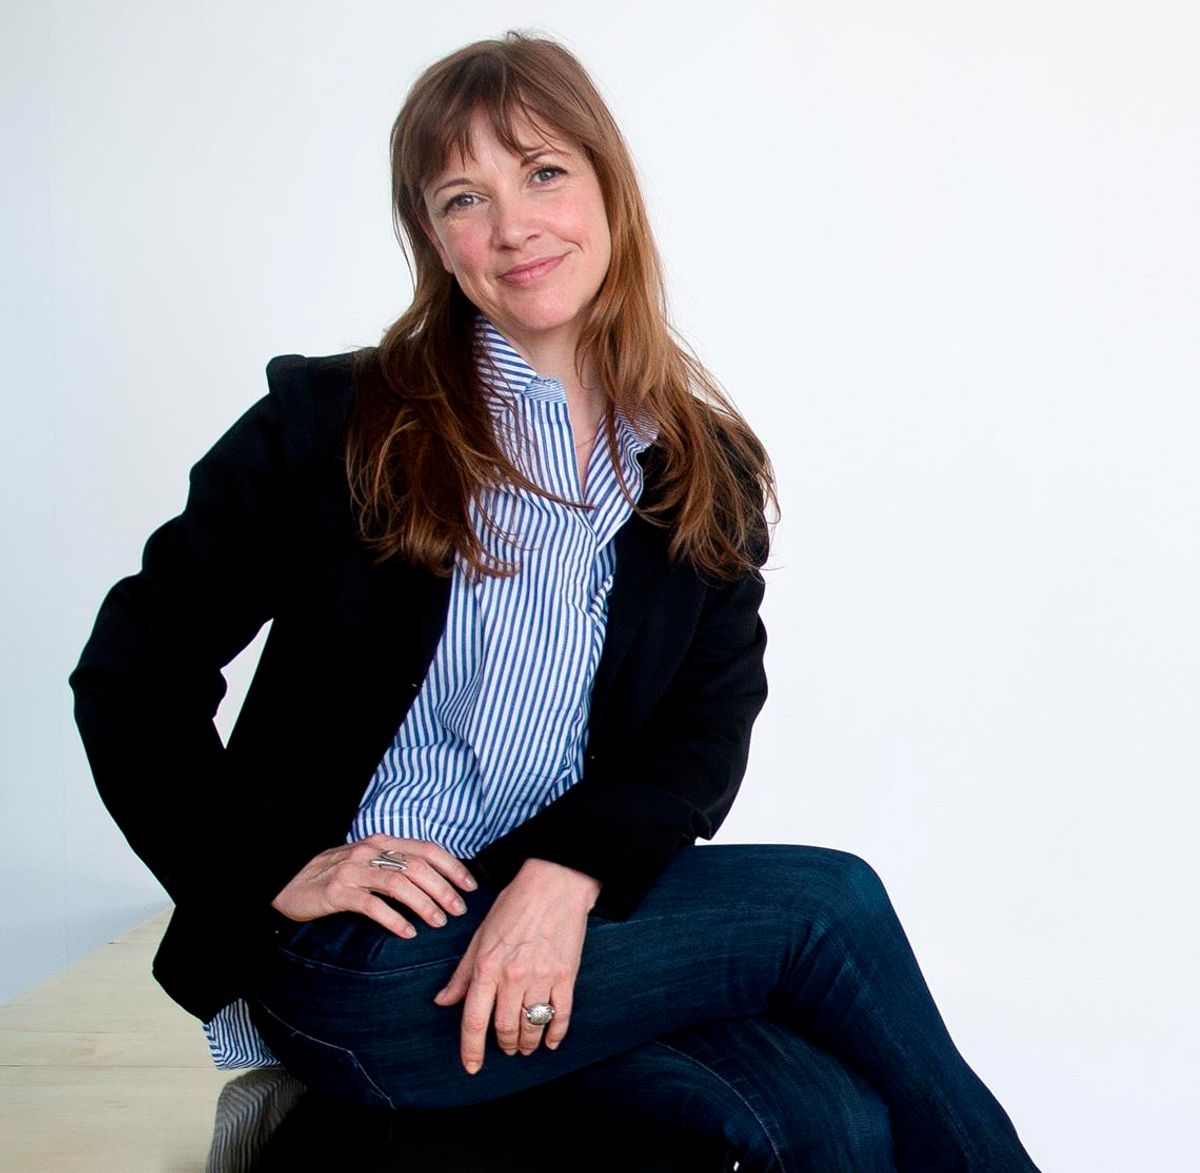 Kate Fowle takes over as director of MoMA PS1 on 3 September James Hill